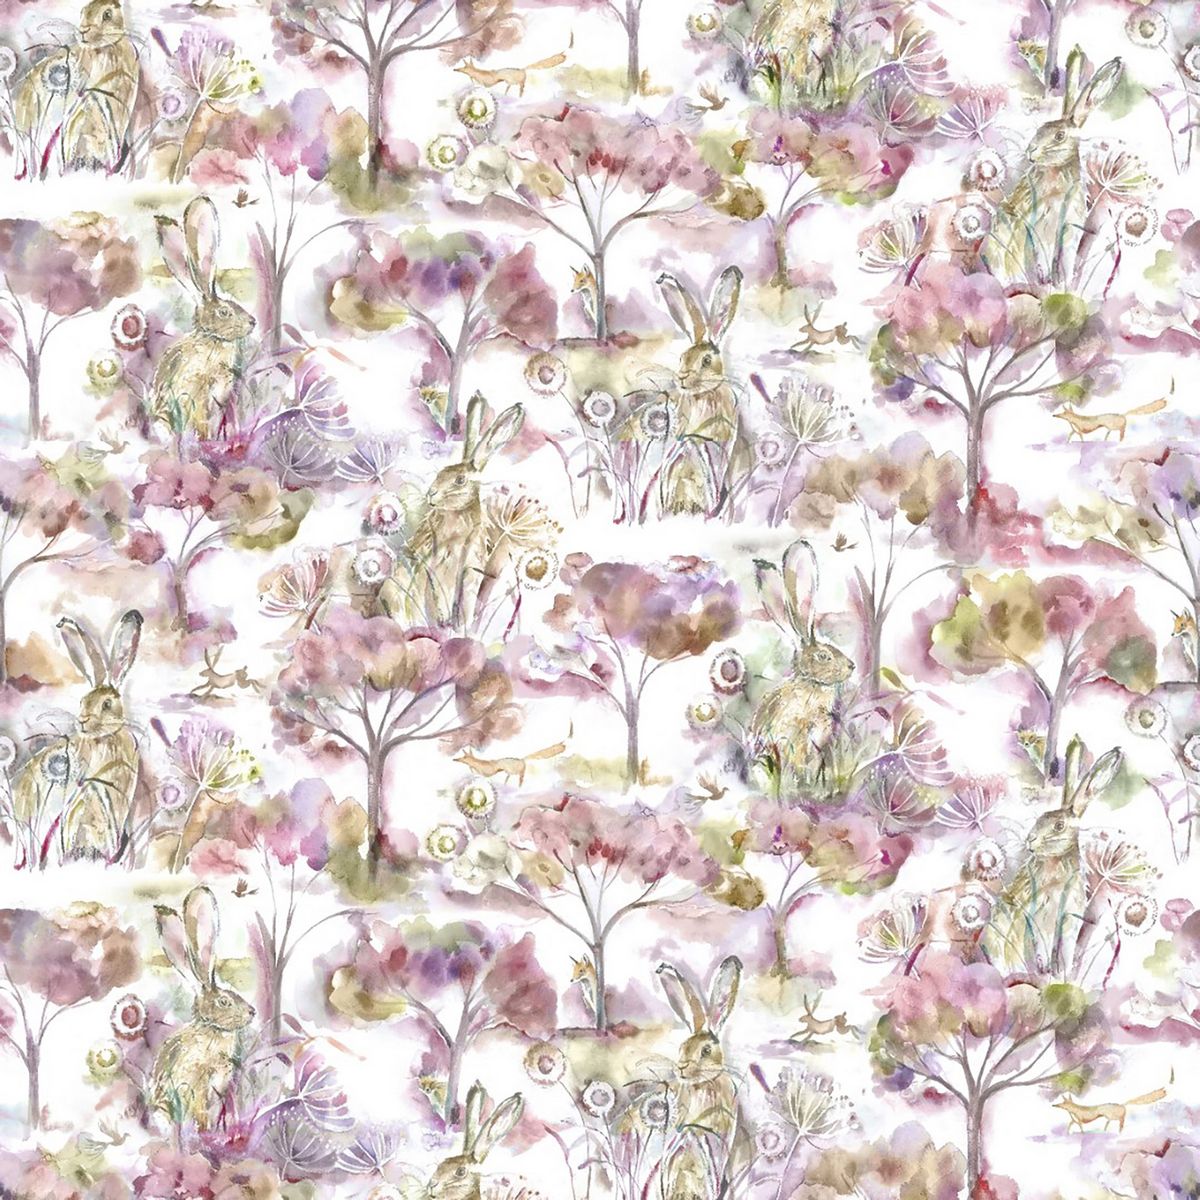 Grassmere Fig Fabric by Voyage Maison